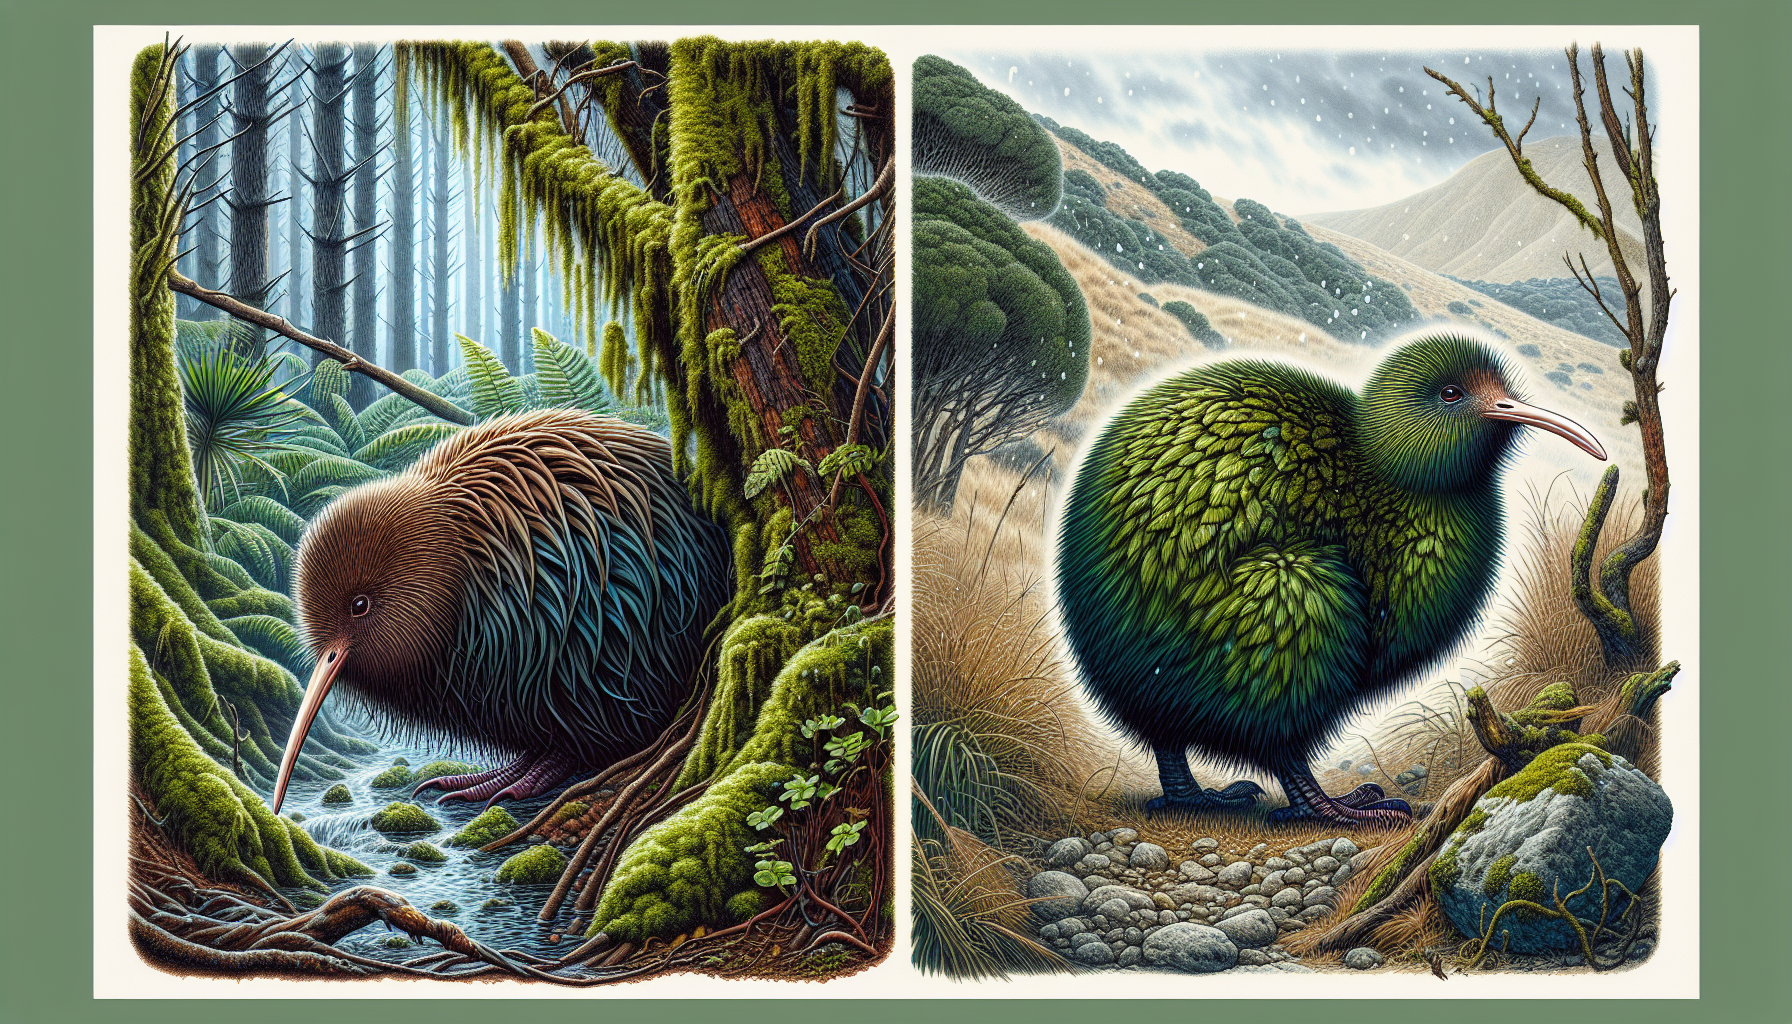 Illustration of kiwi bird in diverse habitats, from moist coniferous forests to dryer areas